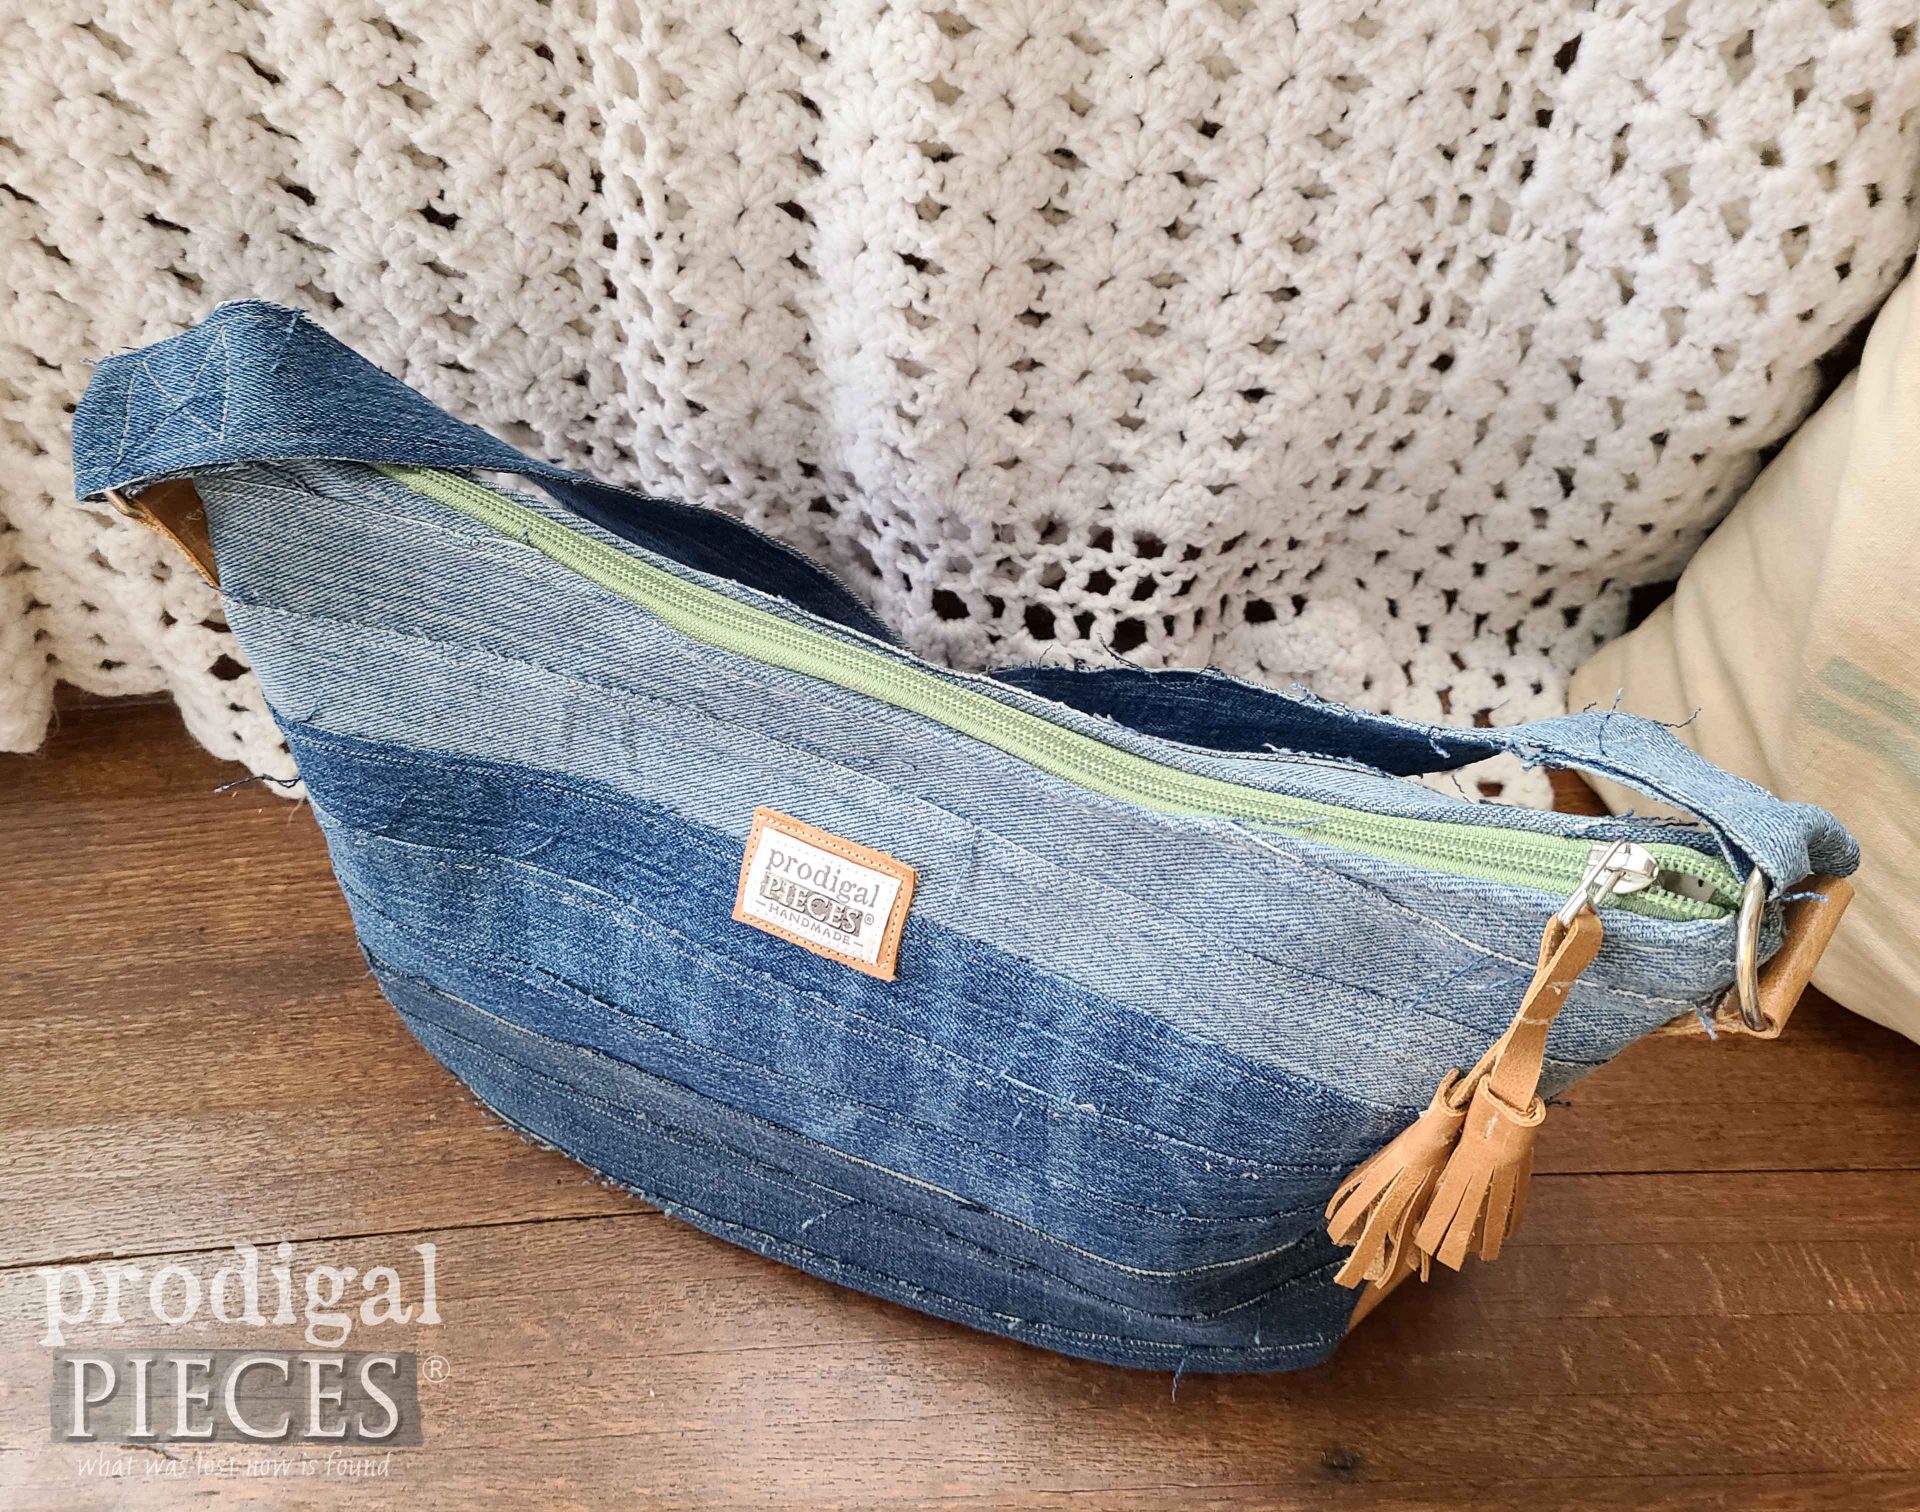 Zippered Hobo Bag from Upcycled Denim Jeans by Larissa of Prodigal Pieces | prodigalpieces.com #prodigalpieces #diy #sewing #upcycle #jeans